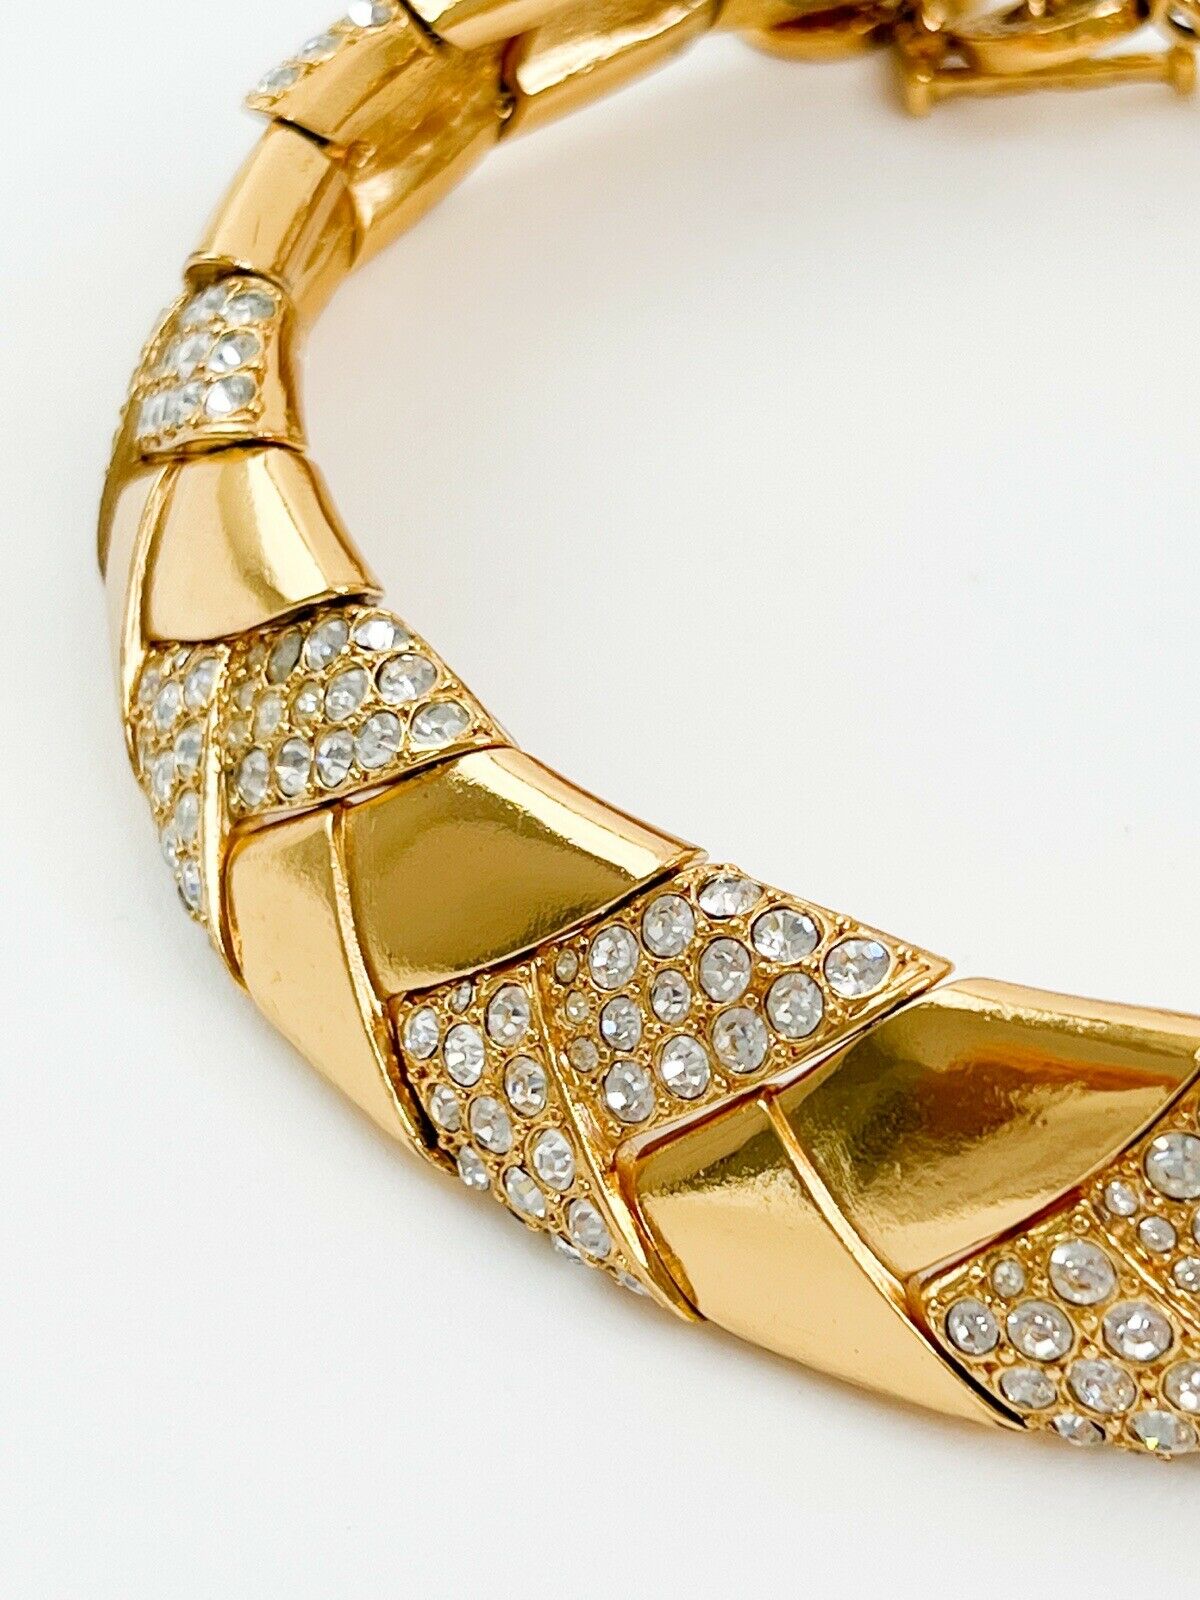 YSL Yves Saint Laurent rive gauche Made in France Vintage Necklace Choker Gold Rhinestones